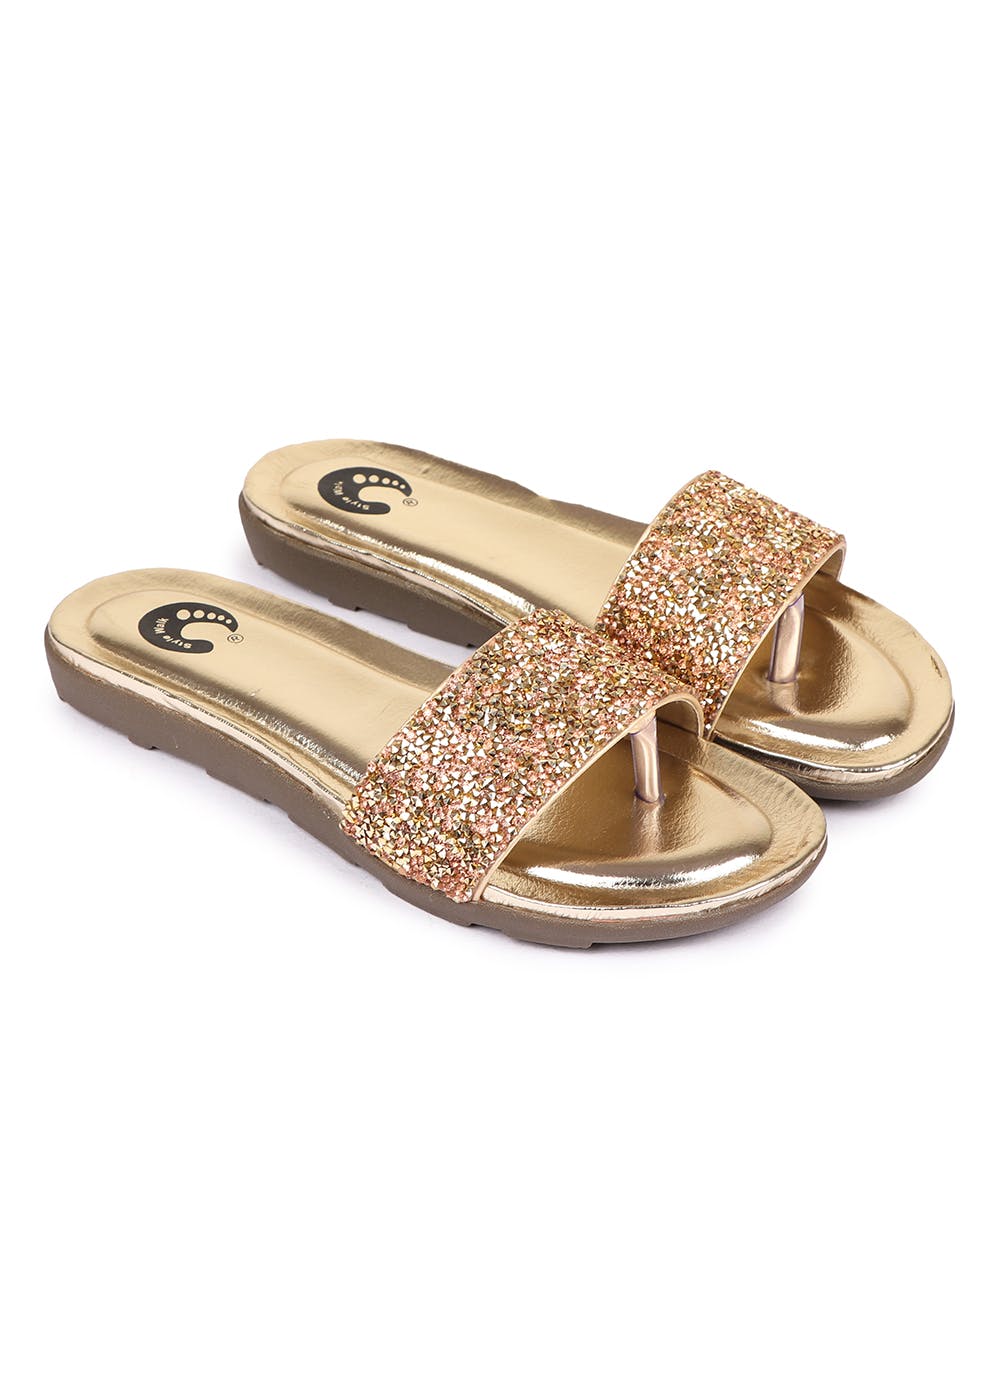 Snoozies Sparkle Ballerina Slippers Gold- Small - Walmart.com